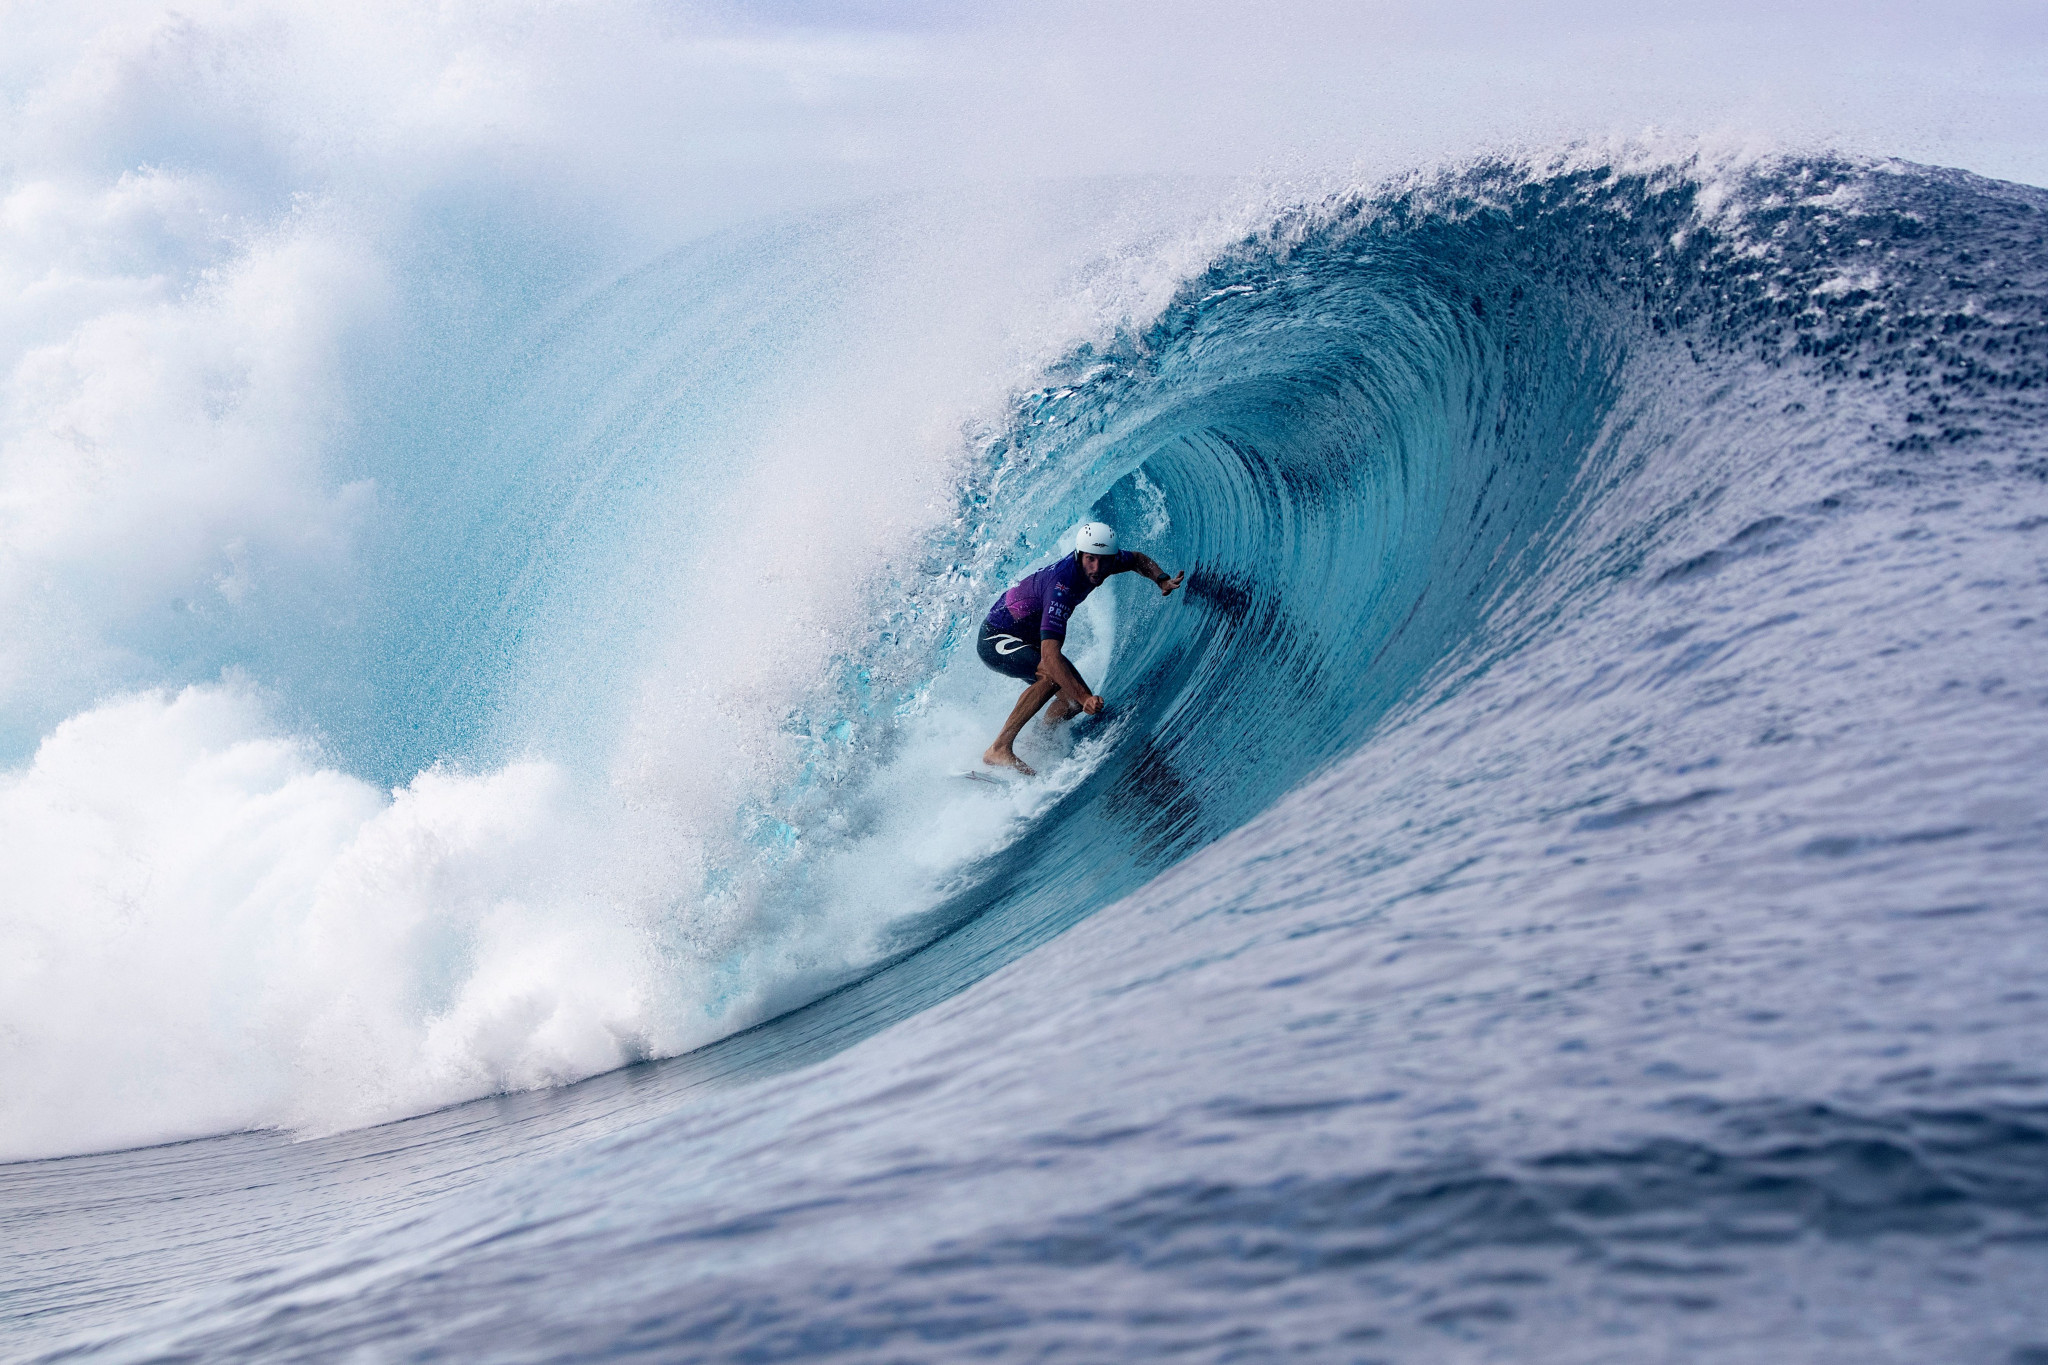 The Teahupo'o wave in Tahiti is to be the scene of surfing's second Olympic appearance in 2024 ©Getty Images